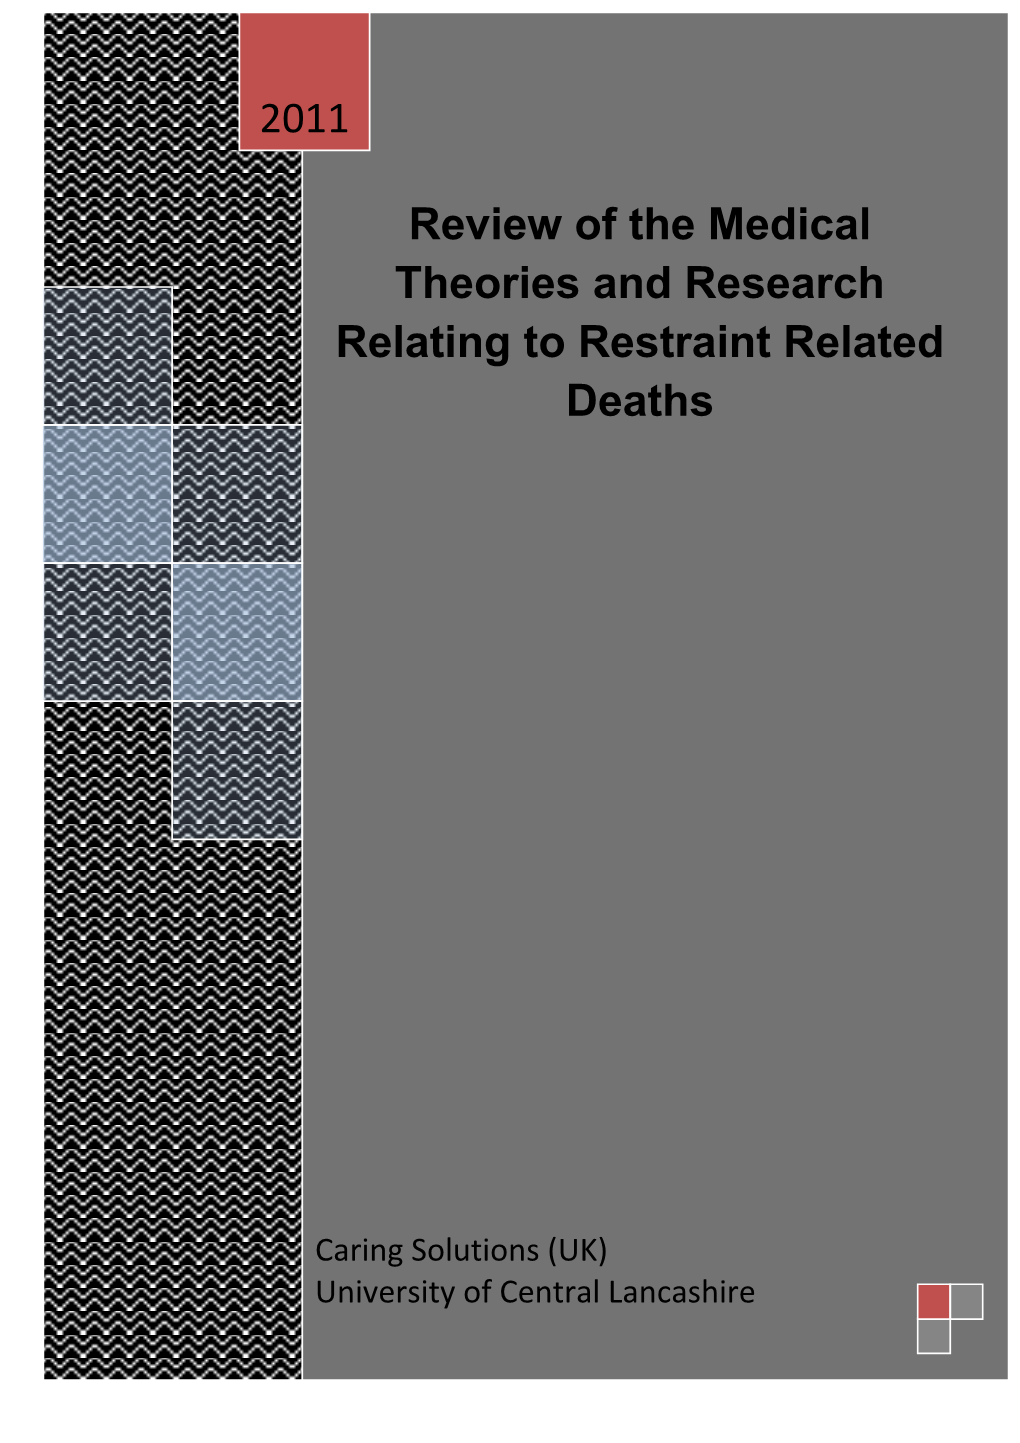 Review of the Medical Theories and Research Relating to Restraint Related Deaths